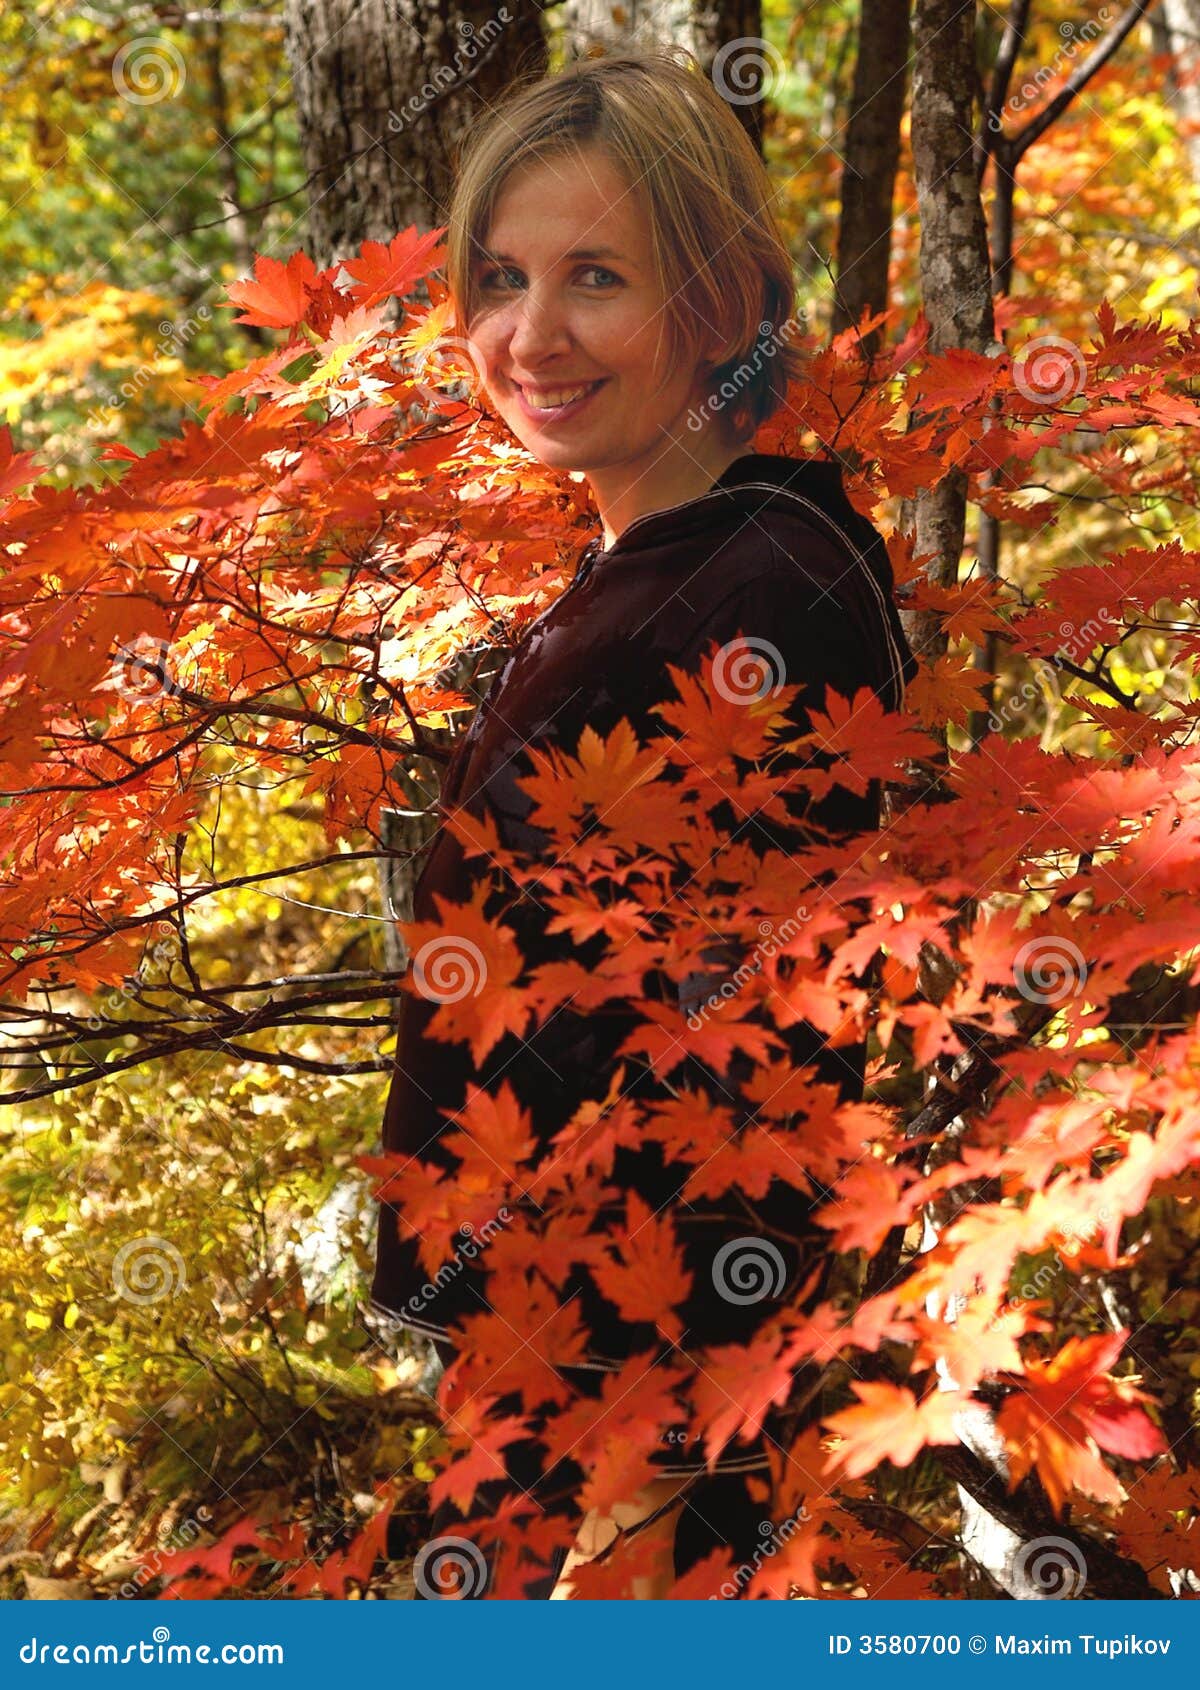 Girl in fall maple leaves stock photo. Image of leaves - 3580700